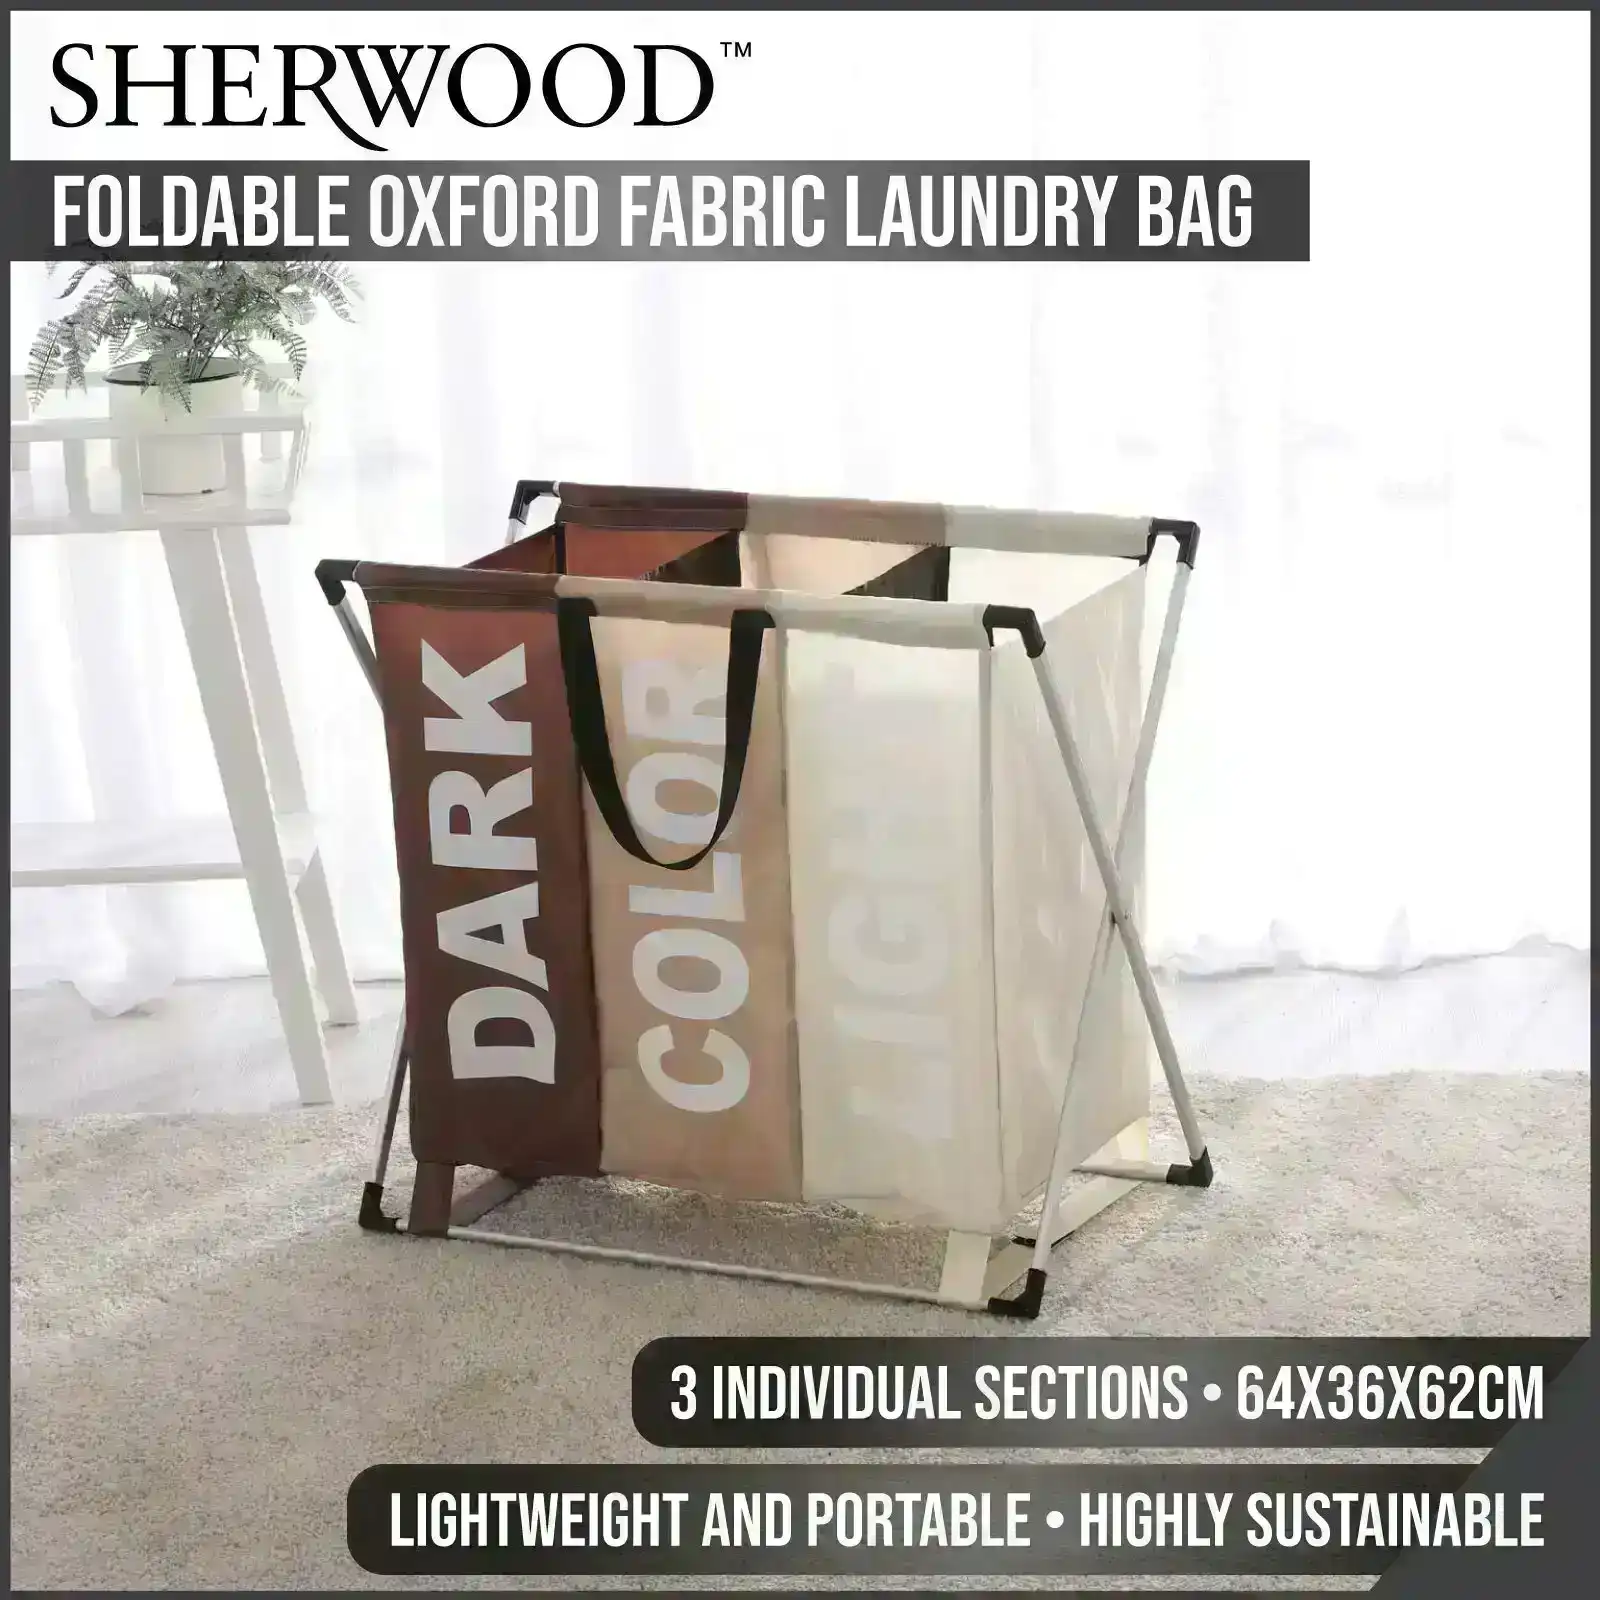 Sherwood Home Foldable Oxford Fabric Laundry Bag Aluminum Frame with 3 Individual Sections 64x36x62cm